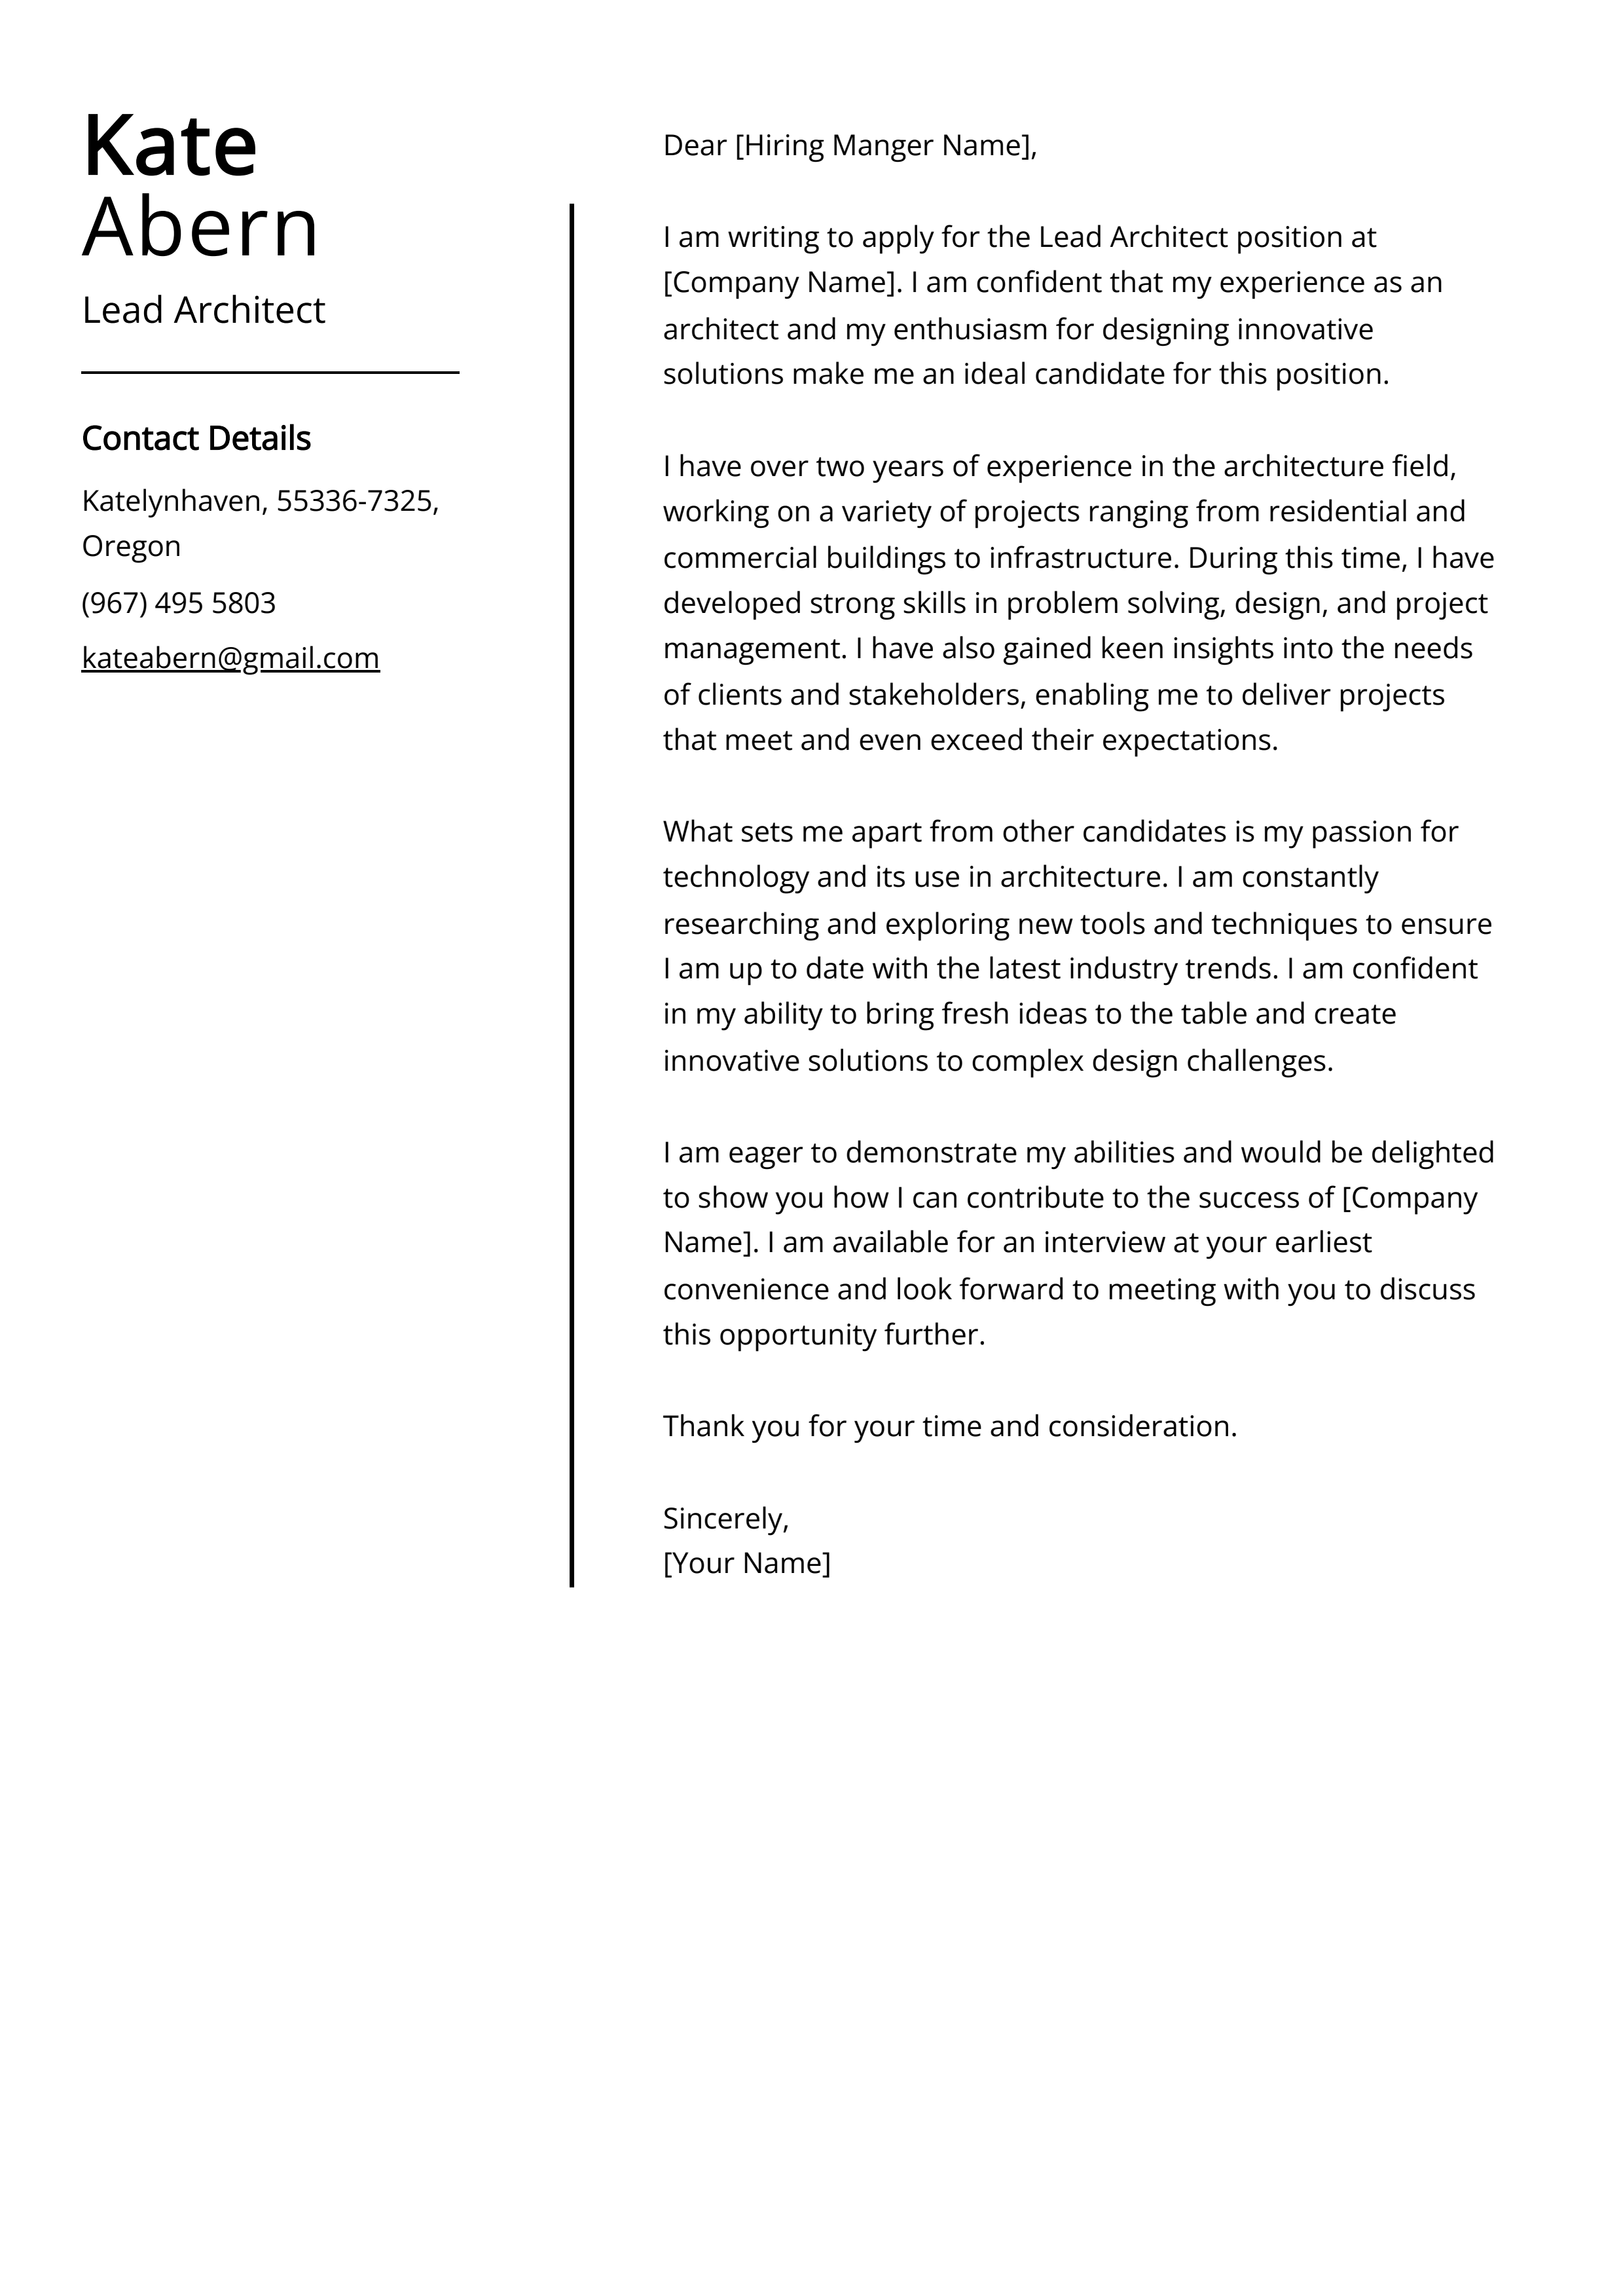 Lead Architect Cover Letter Example